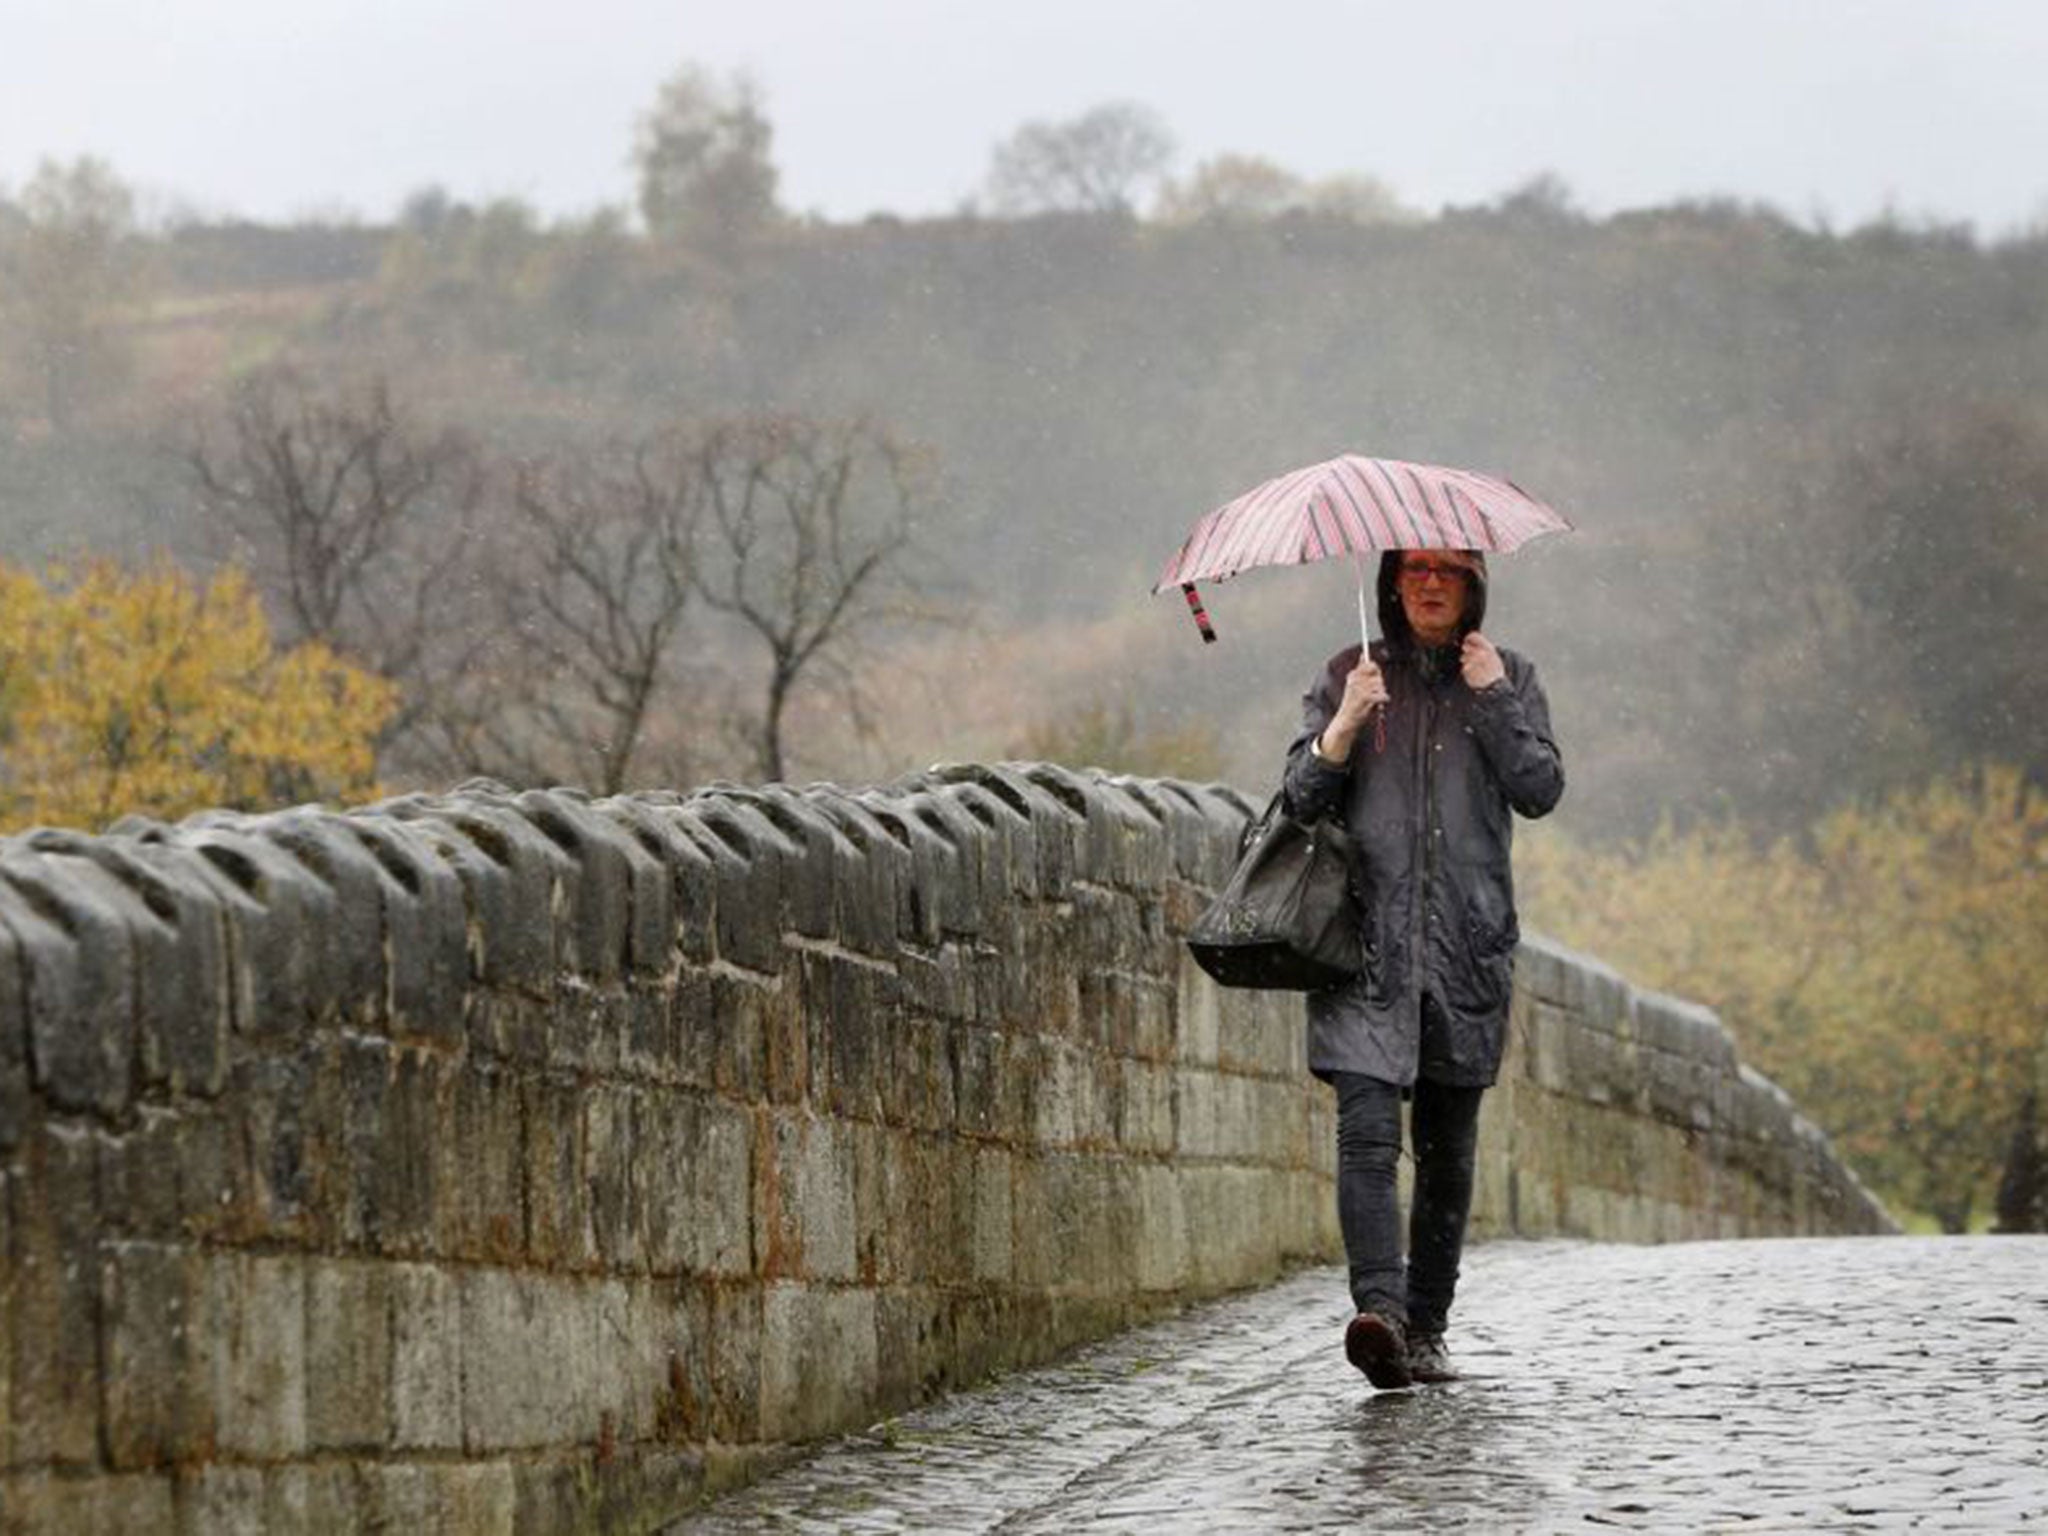 UK weather: Summer heatwave makes way for rain and cooler temperatures - Th...